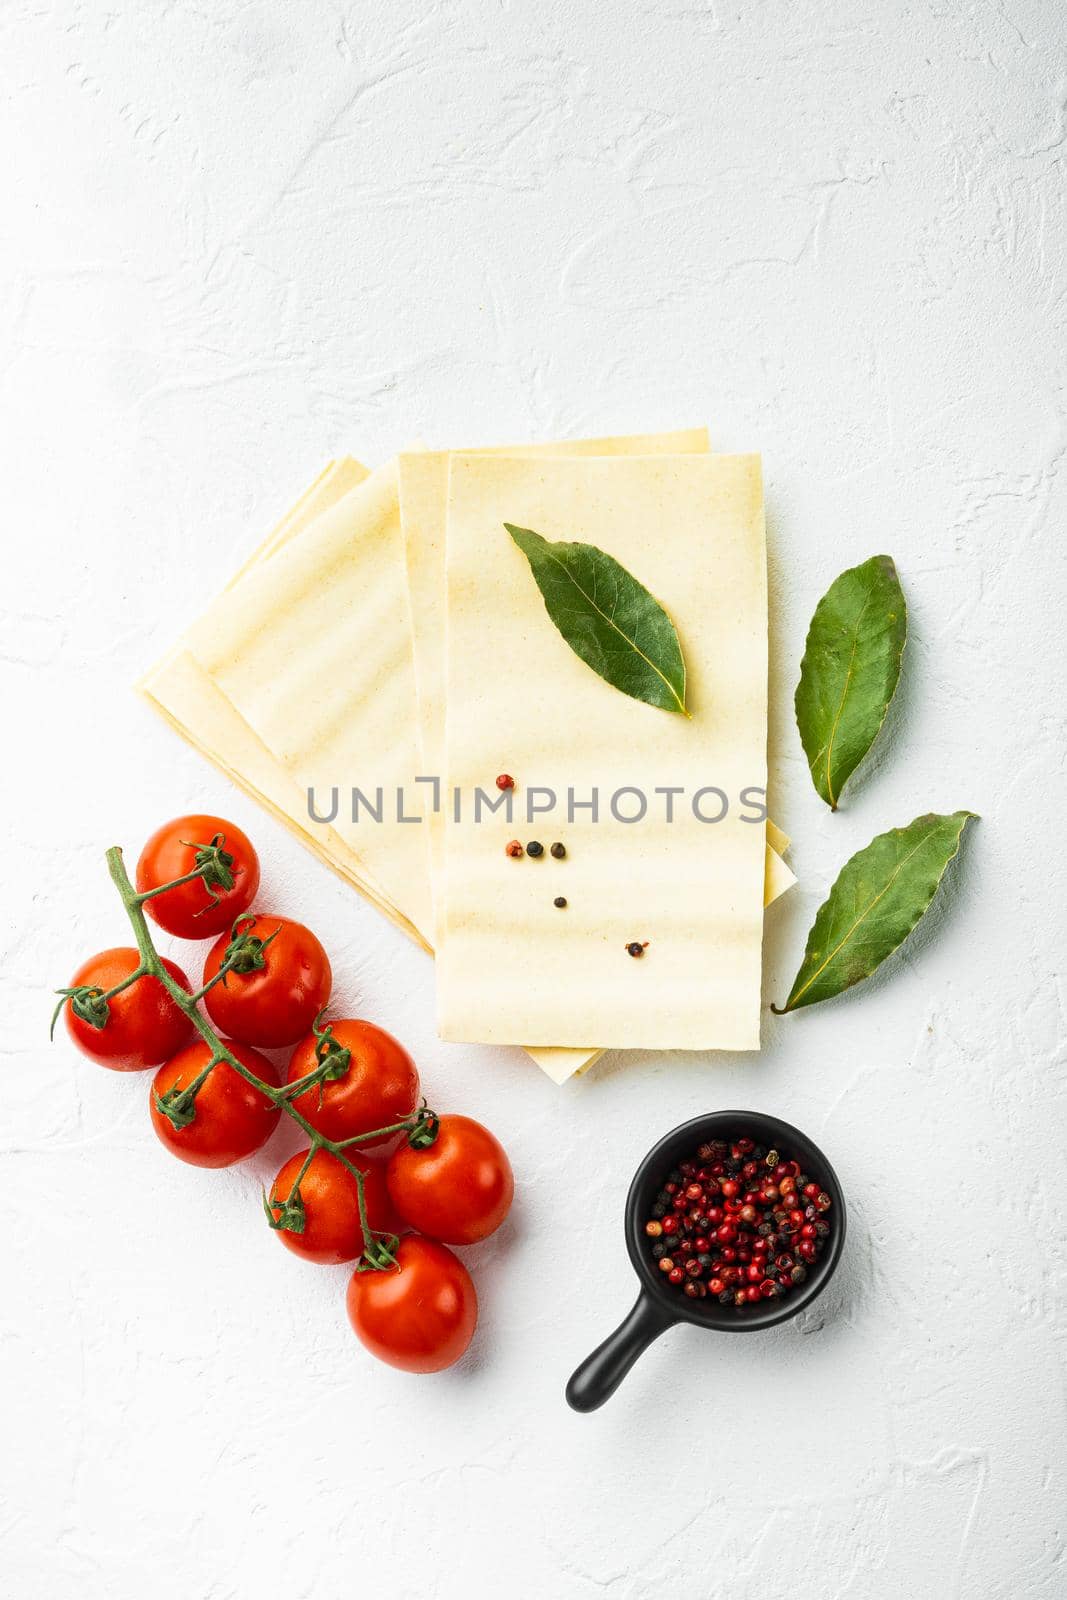 Dried uncooked lasagna pasta sheets, with seasoning and herb, on white stone background, top view, flat lay by Ilianesolenyi